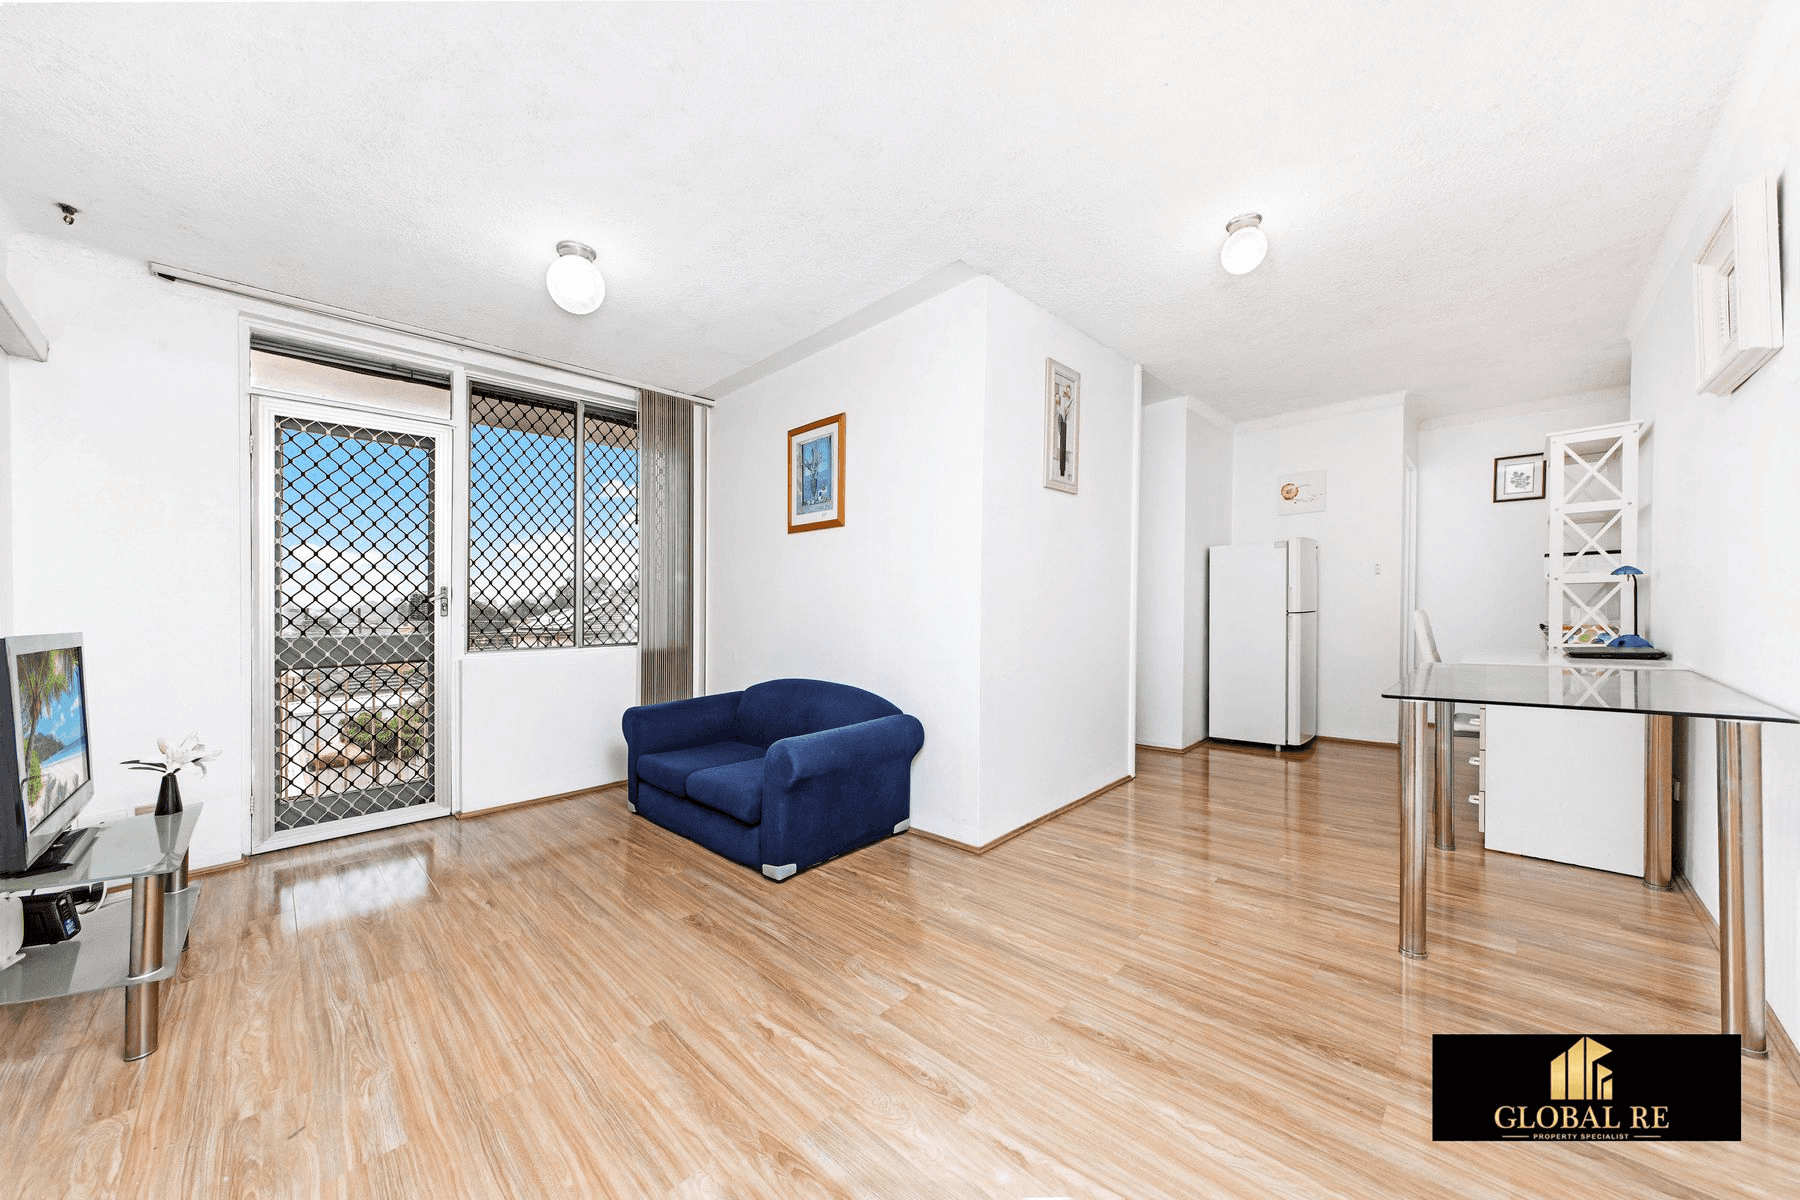 4/132-134 Lansdowne Rd, CANLEY VALE, NSW 2166